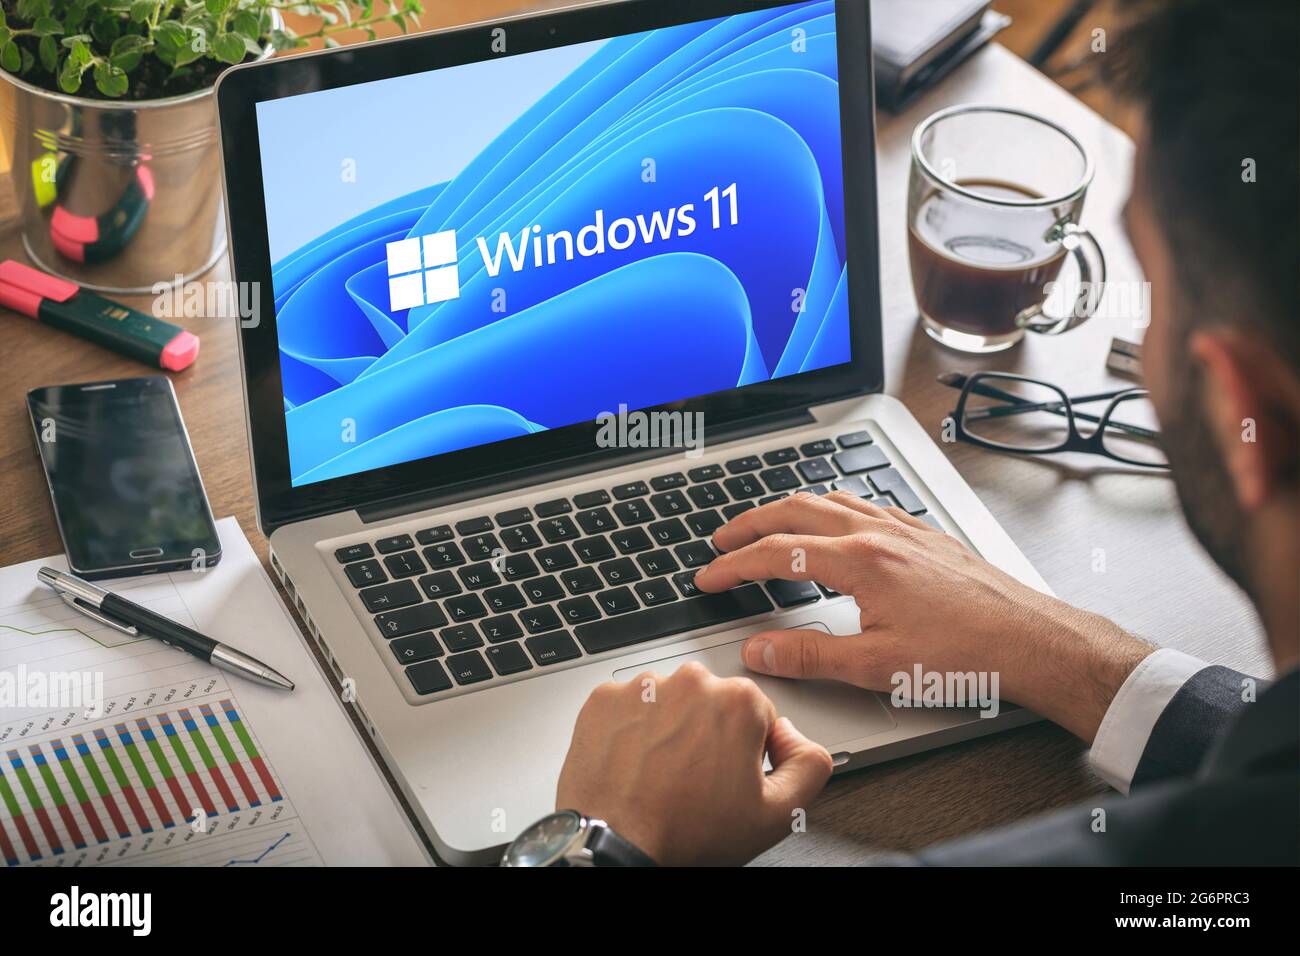 Greece Athens, July 8 2021. Man working with a laptop, Windows 11 new Microsoft operating system on computer display, business office desk background. Stock Photo